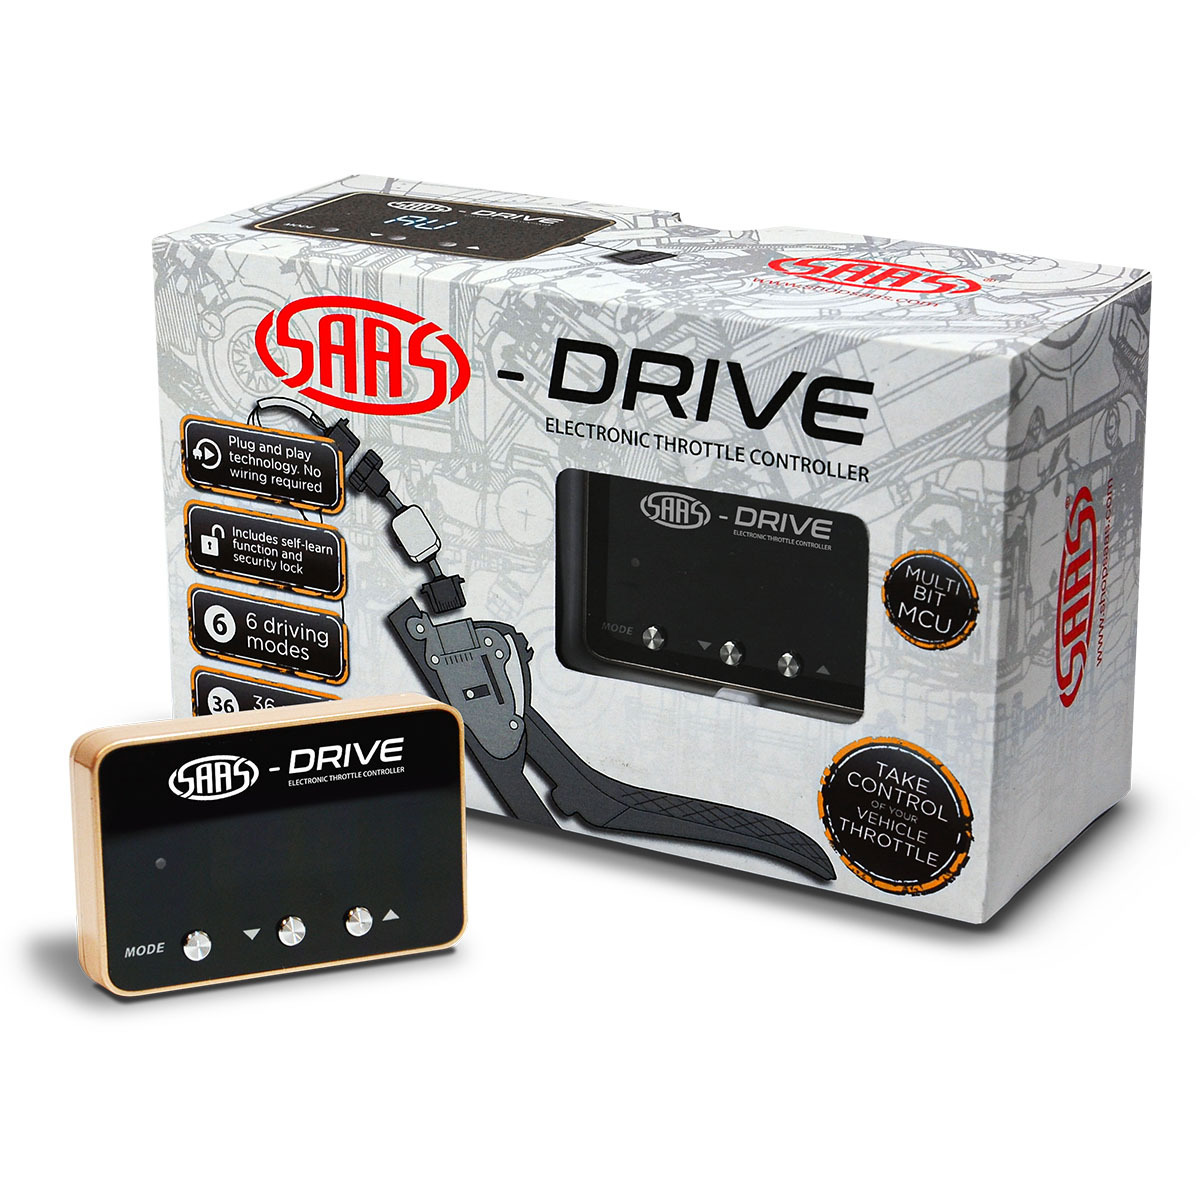 SAAS-Drive Ford Territory 2010 on Throttle Controller